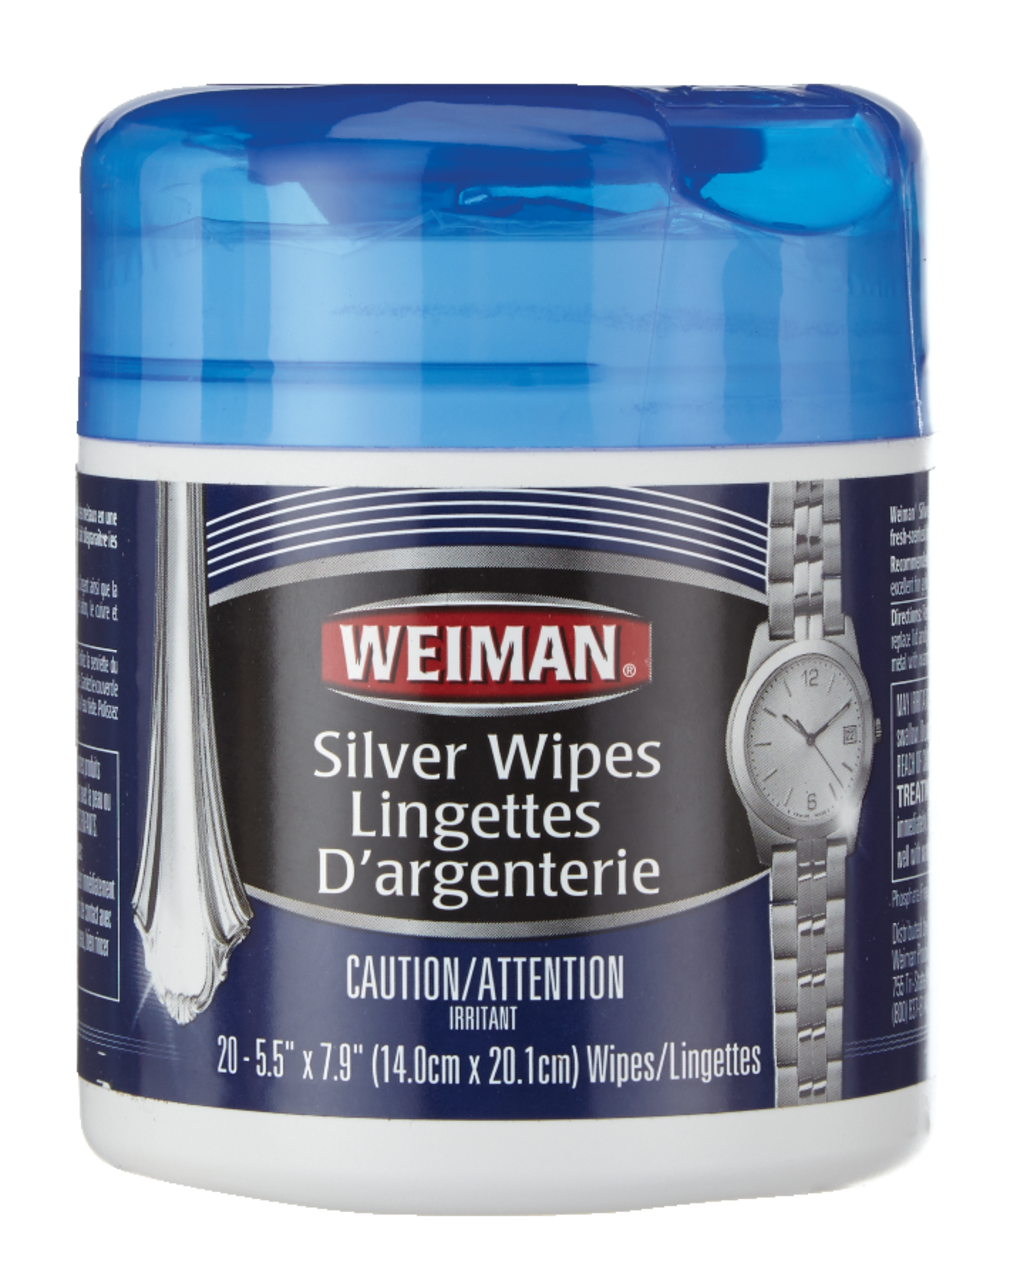 Weiman Silver Polish & Tarnish Remover 20 ct Cleaner Wipes (Pack of 2)